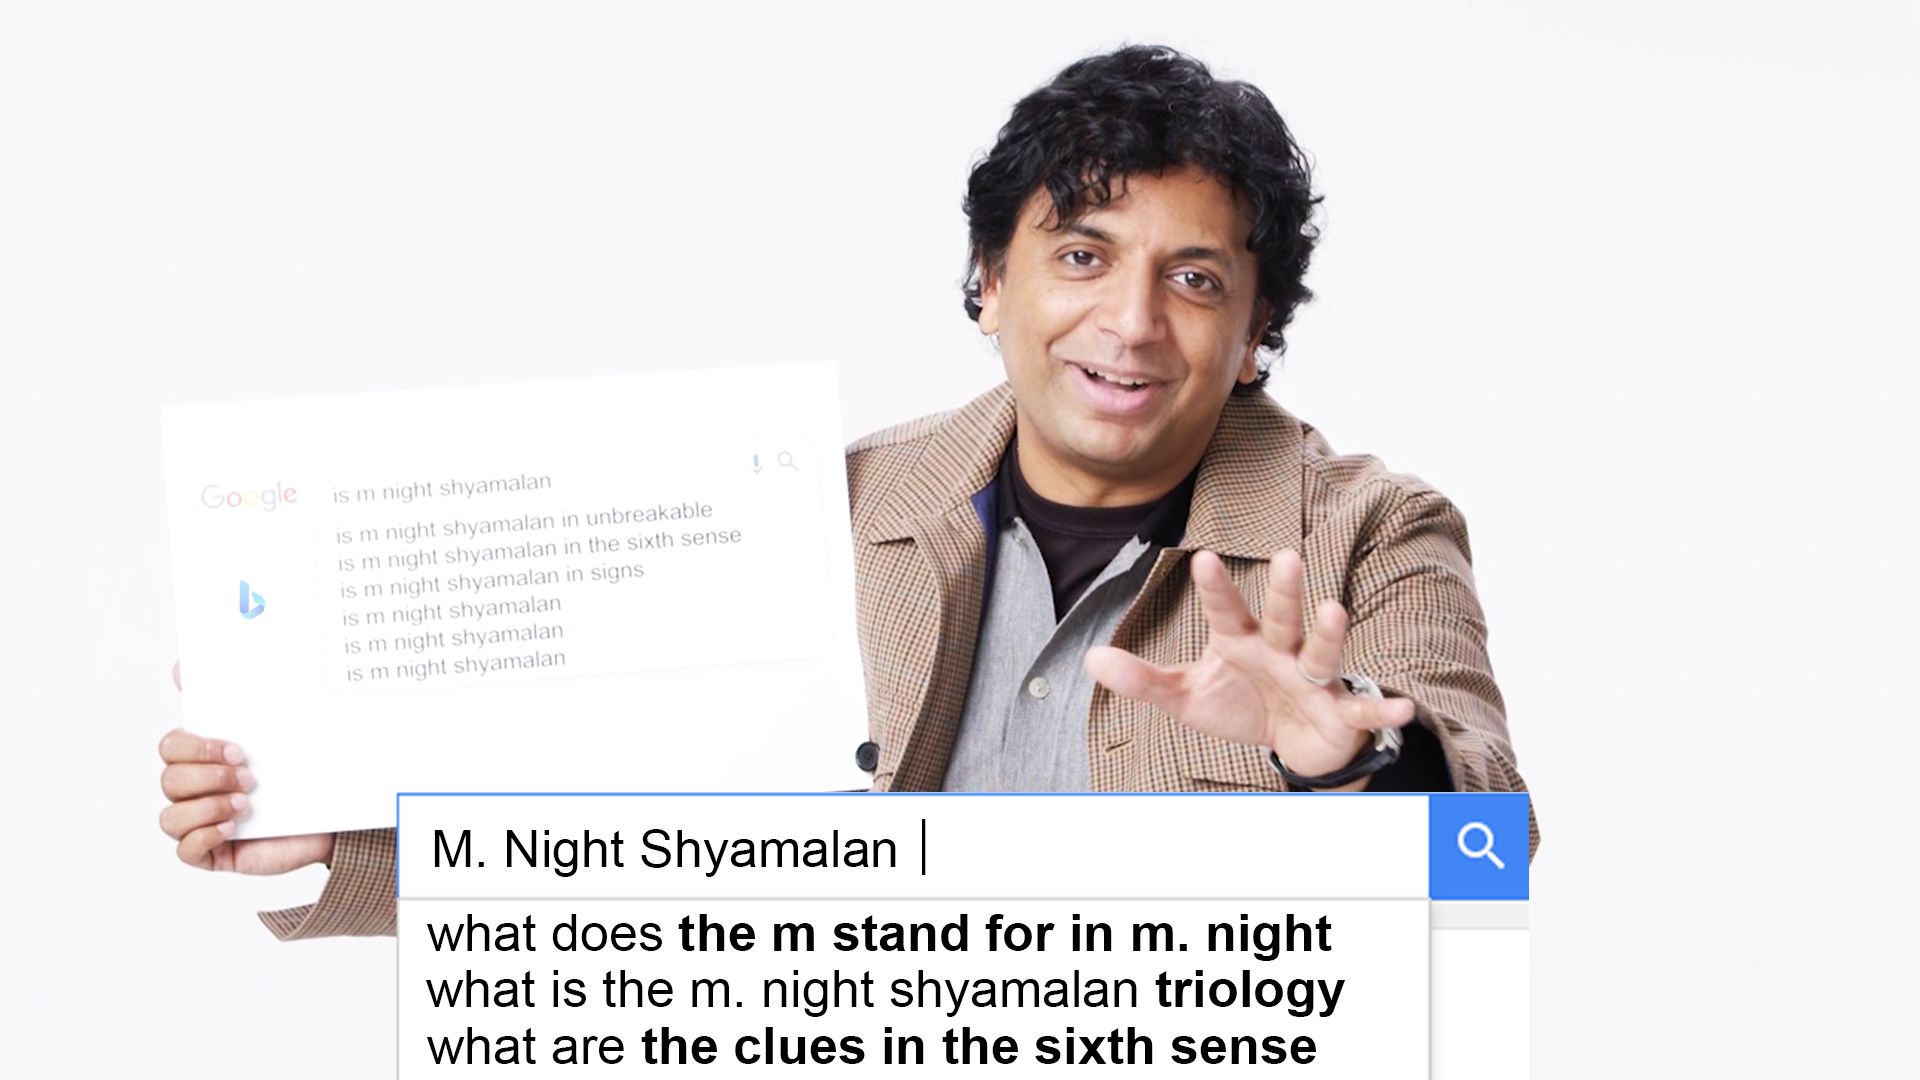 Watch M. Night Shyamalan Answers the Web's Most Searched Questions, Autocomplete Interview